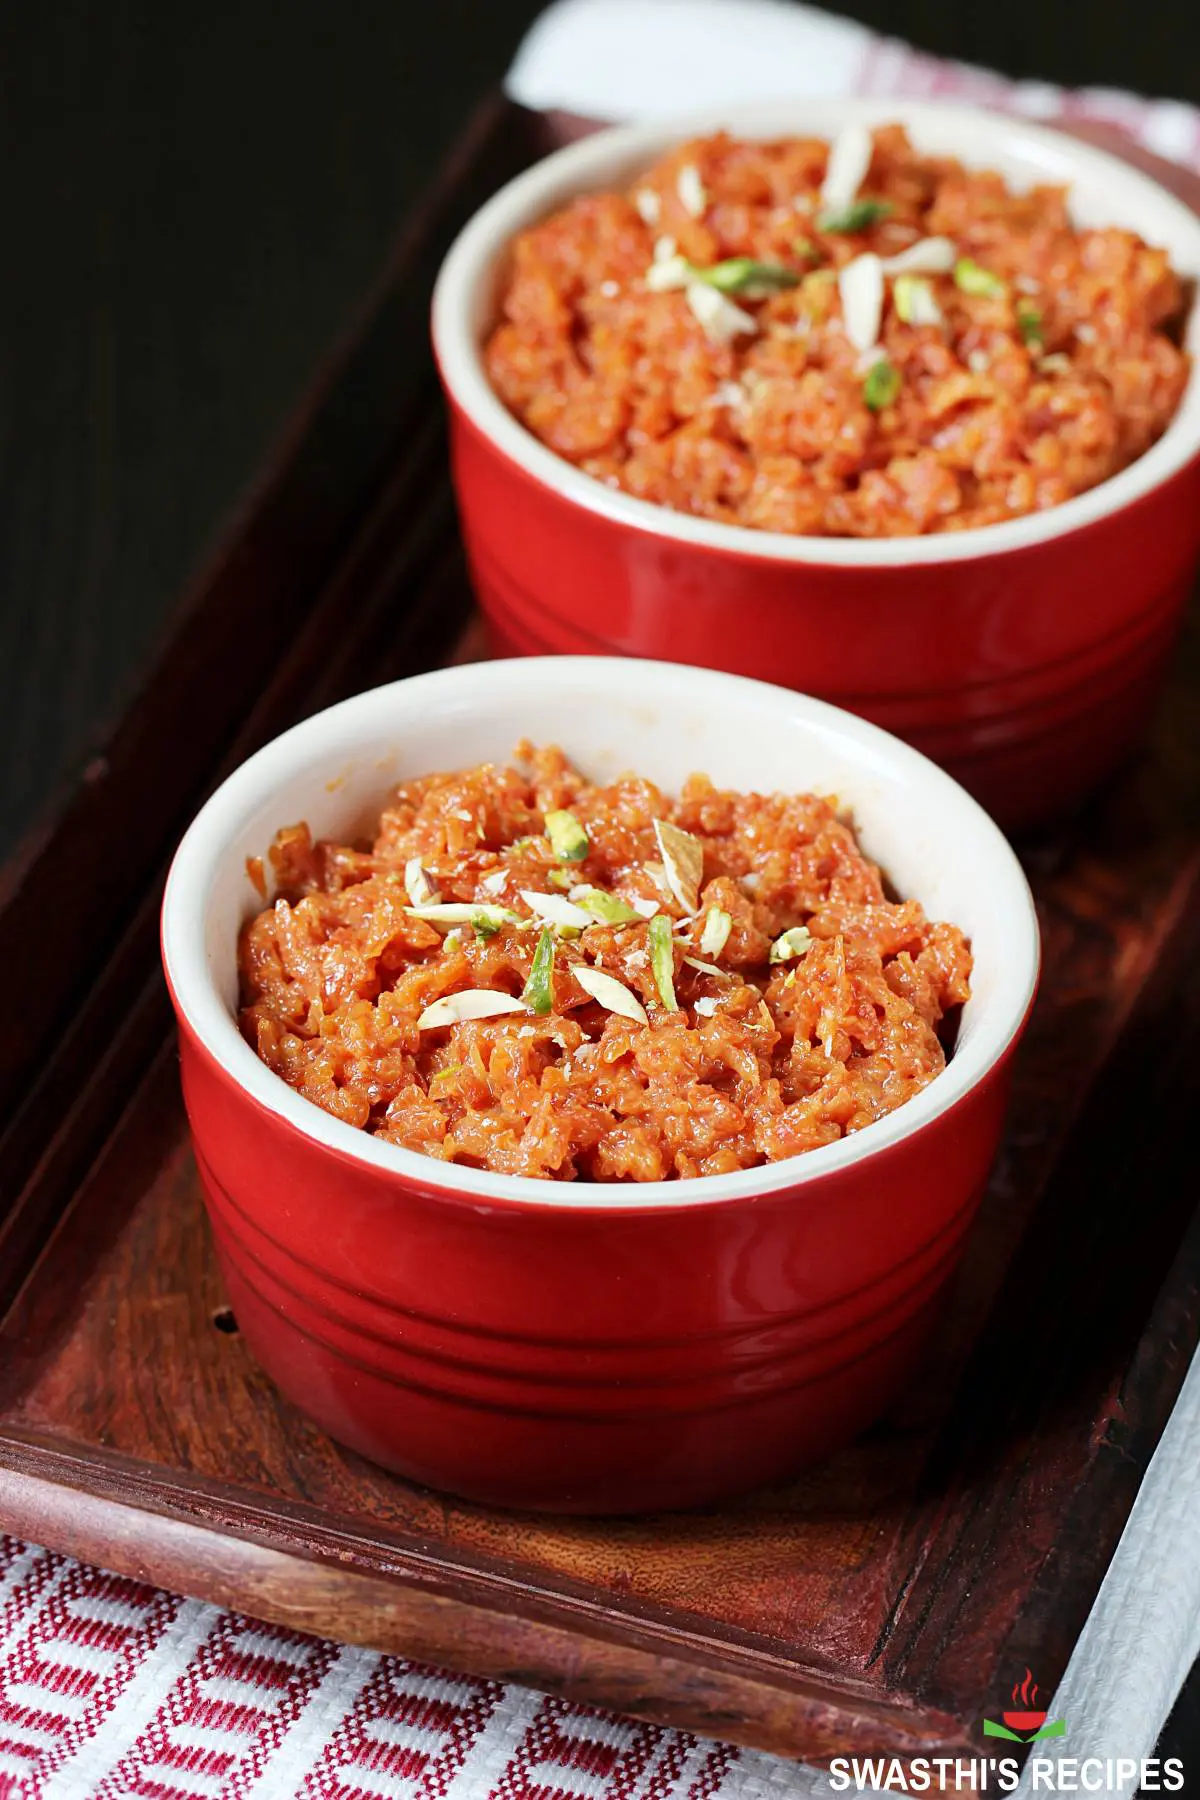 carrot halwa also known as gajar halwa served in a bowl